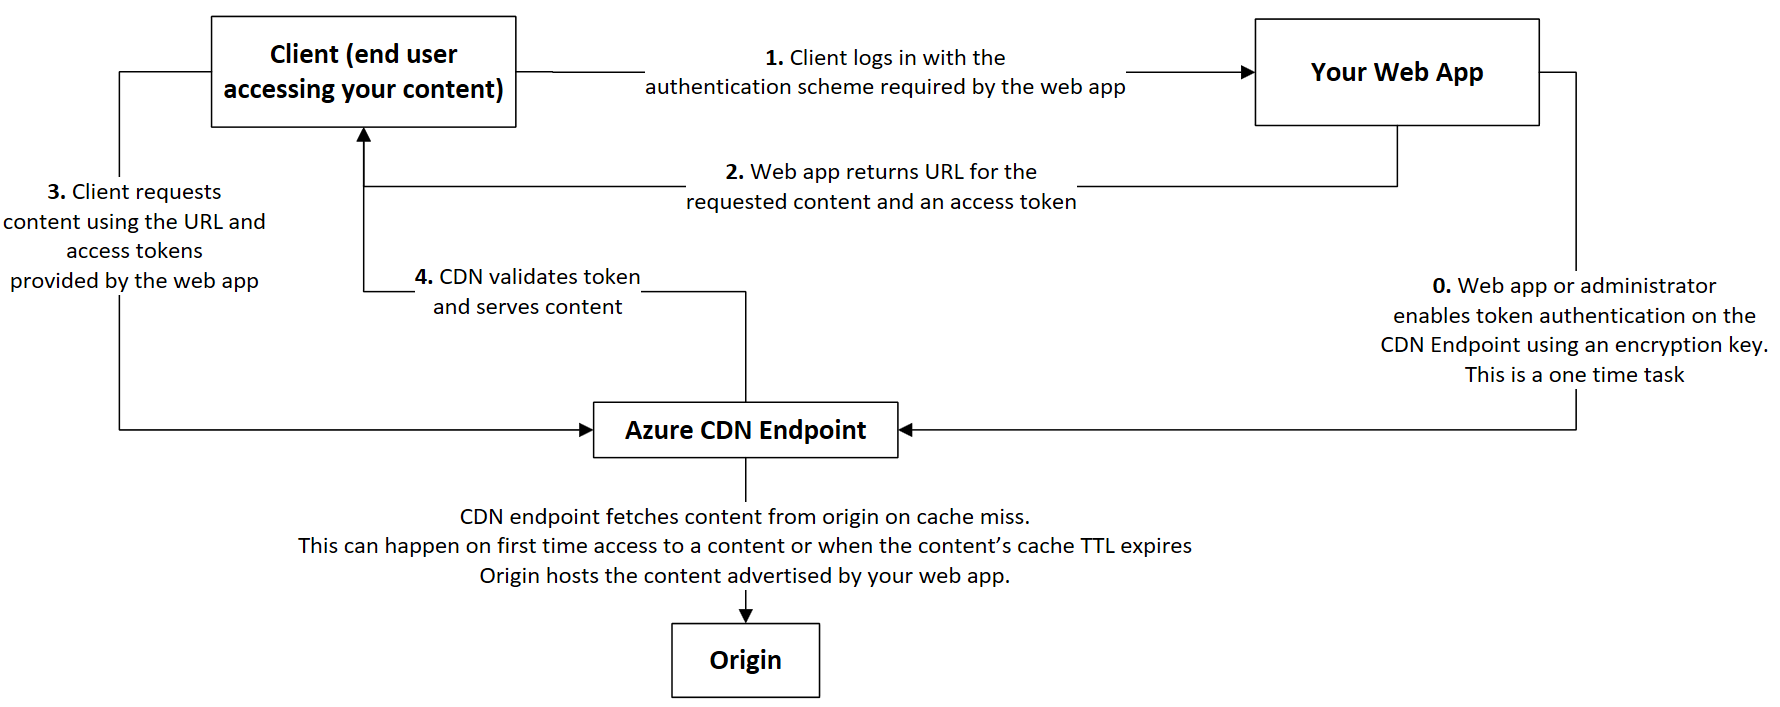 Screenshot of the Content delivery network token authentication workflow.